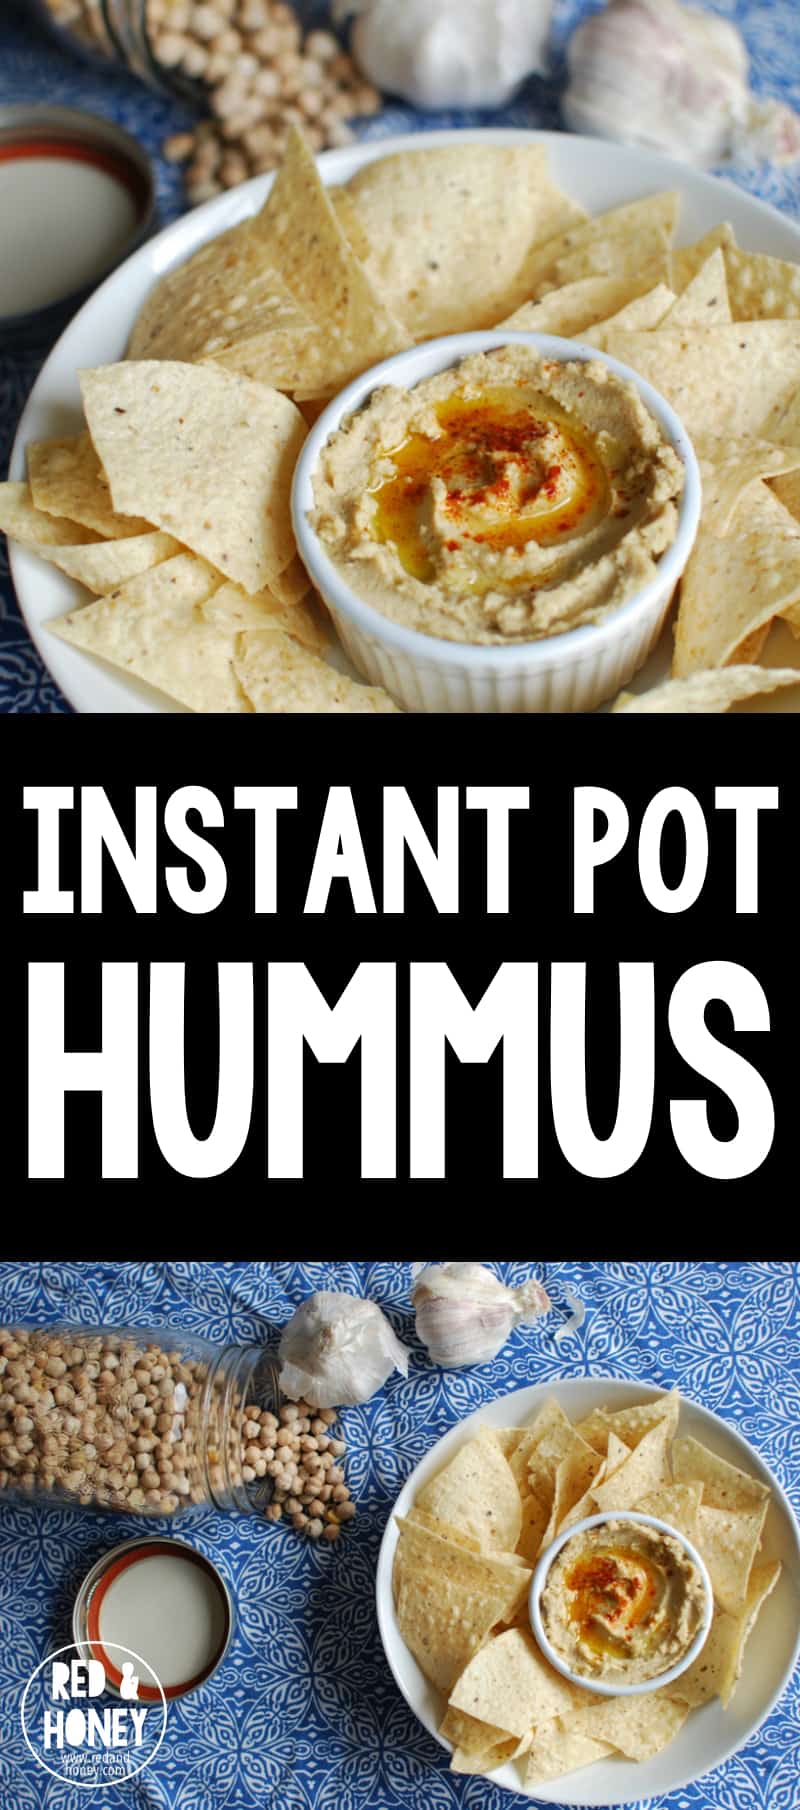 This Instant Pot Hummus recipe is frugal (legumes FTW), easy (thank-you, dear Instant Pot), and best of all: it helps to fill my kids' insatiable hollow legs. They scarf it down, I feel good about serving them REAL food, not junk. We all win. :) 